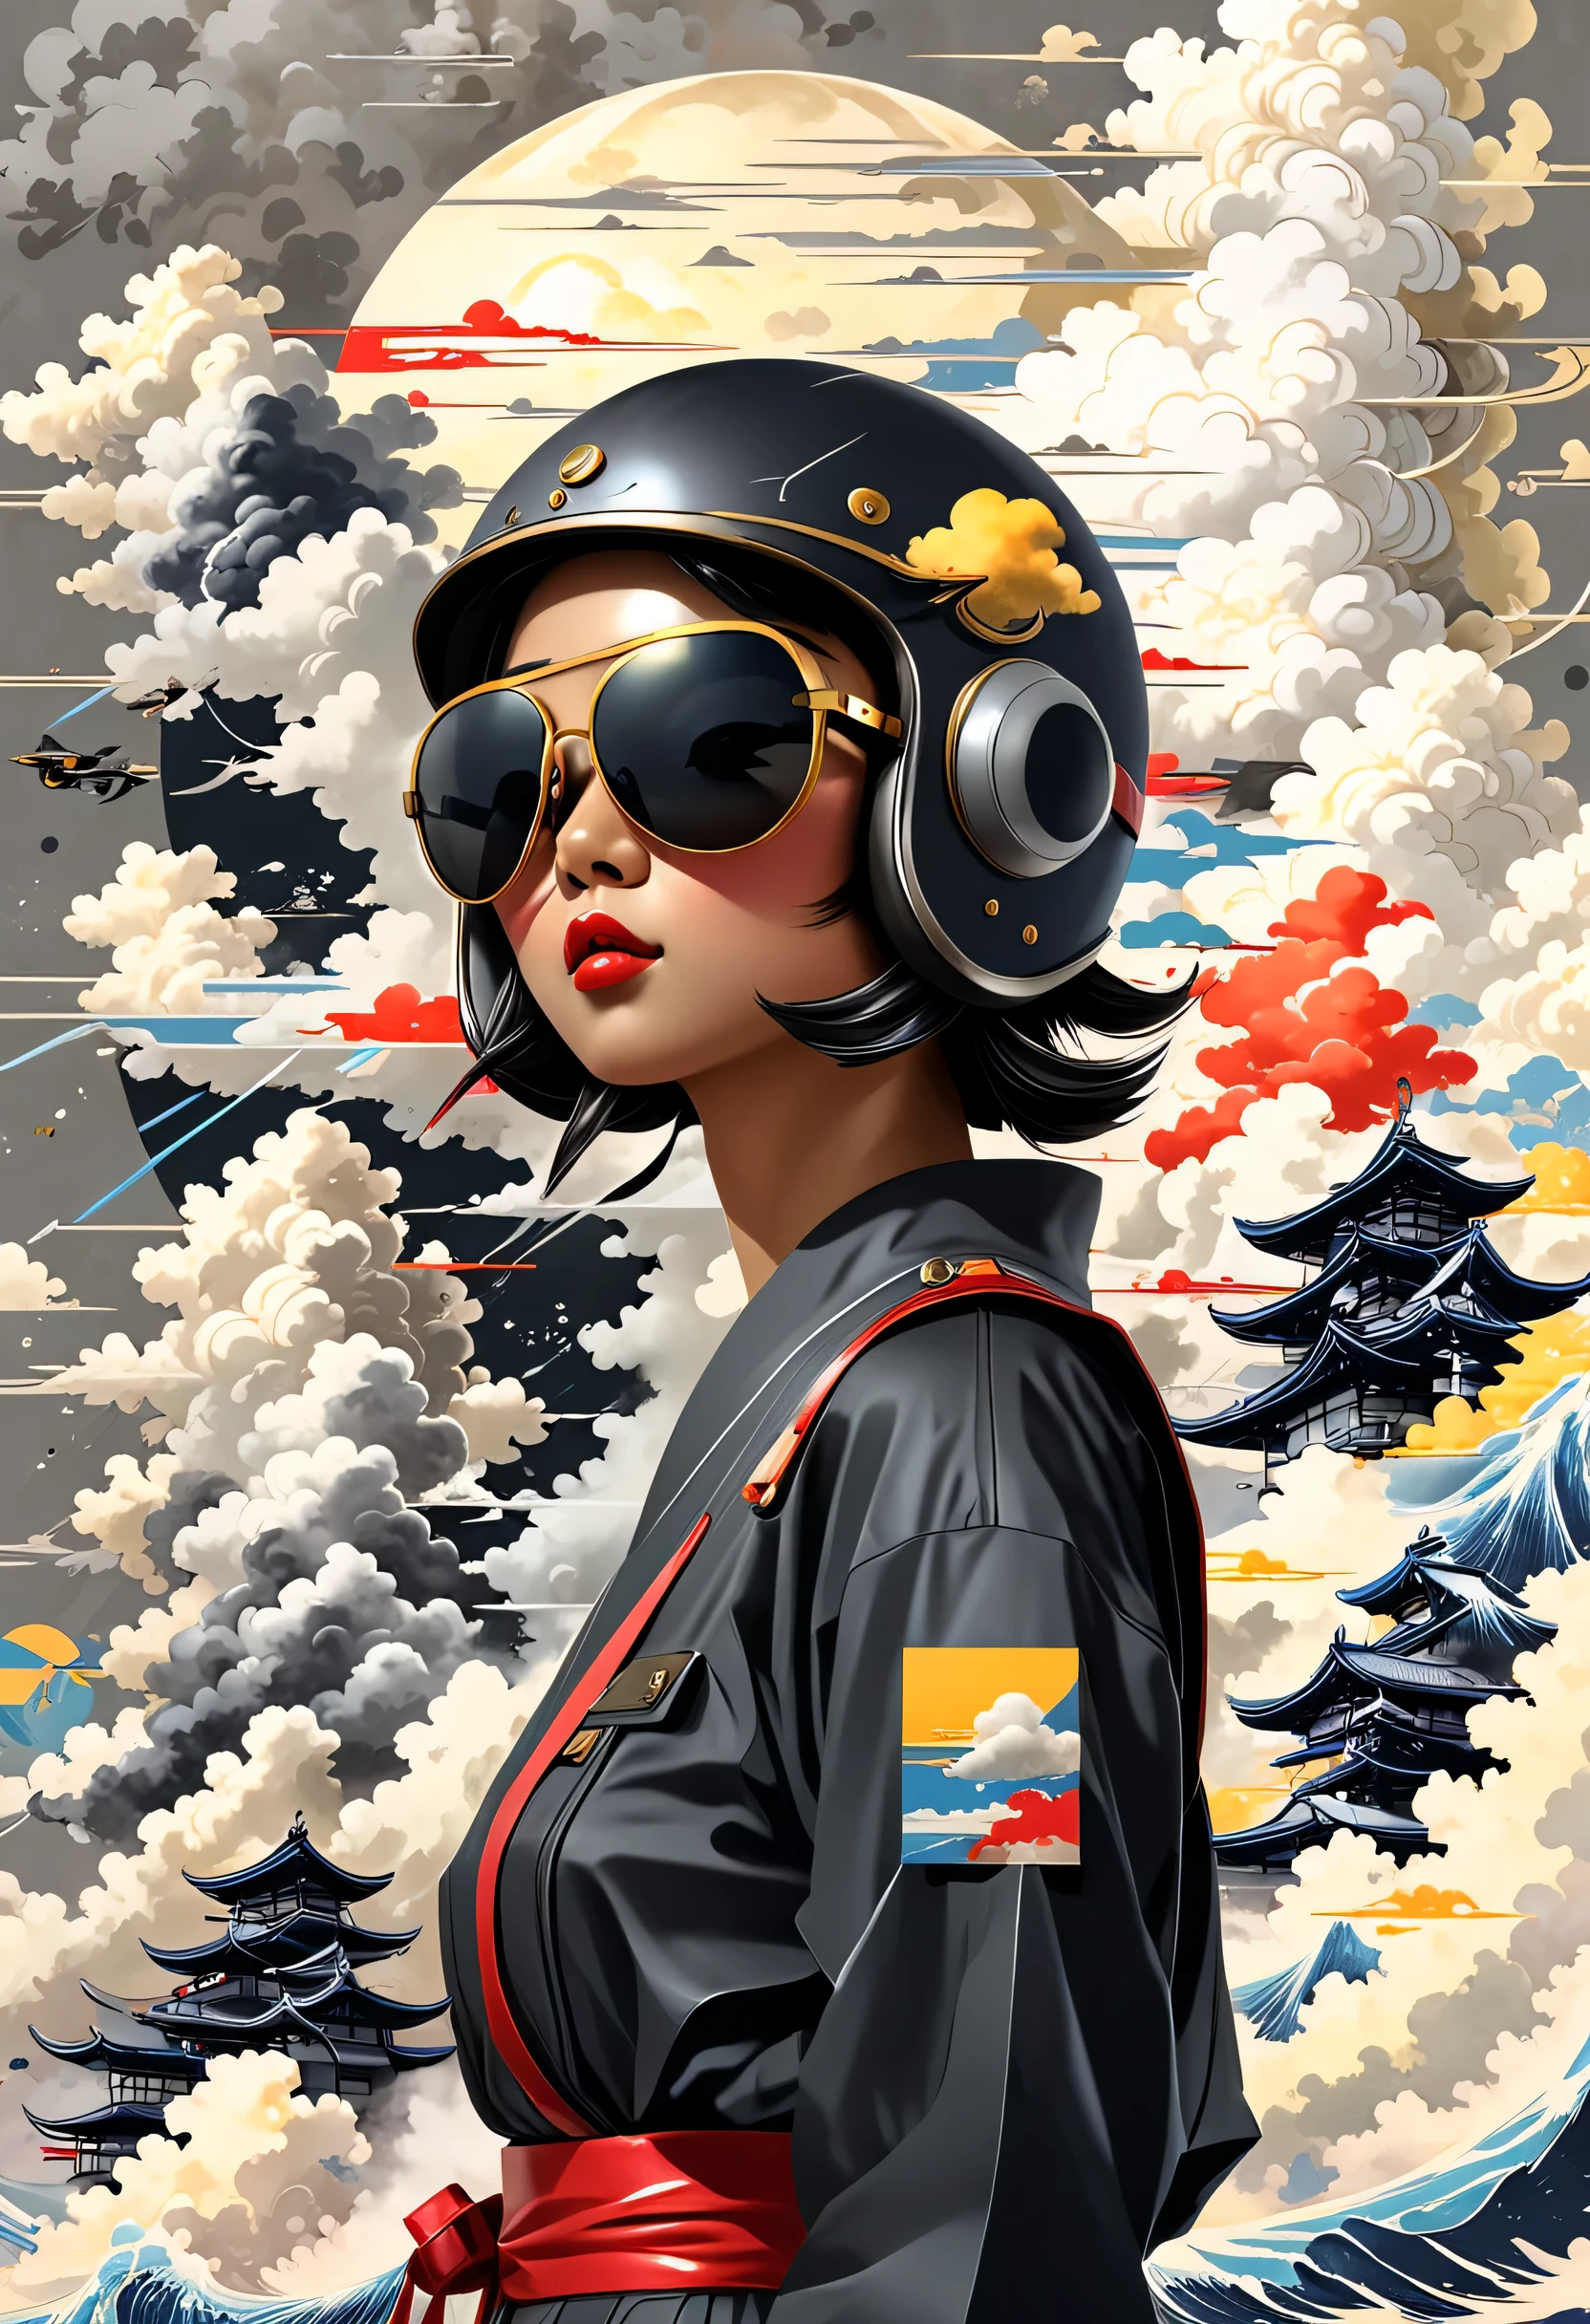 Illustration of a girl wearing a jet-type helmet、wearing sunglasses、Standing stunned、Styles of Japan painting、Comes with a large switch button、metallic、gray cloud background、thundercloud、masterpiece、highest quality、ultra high resolution、golden ratio、maximum coefficient、mohenjodaro